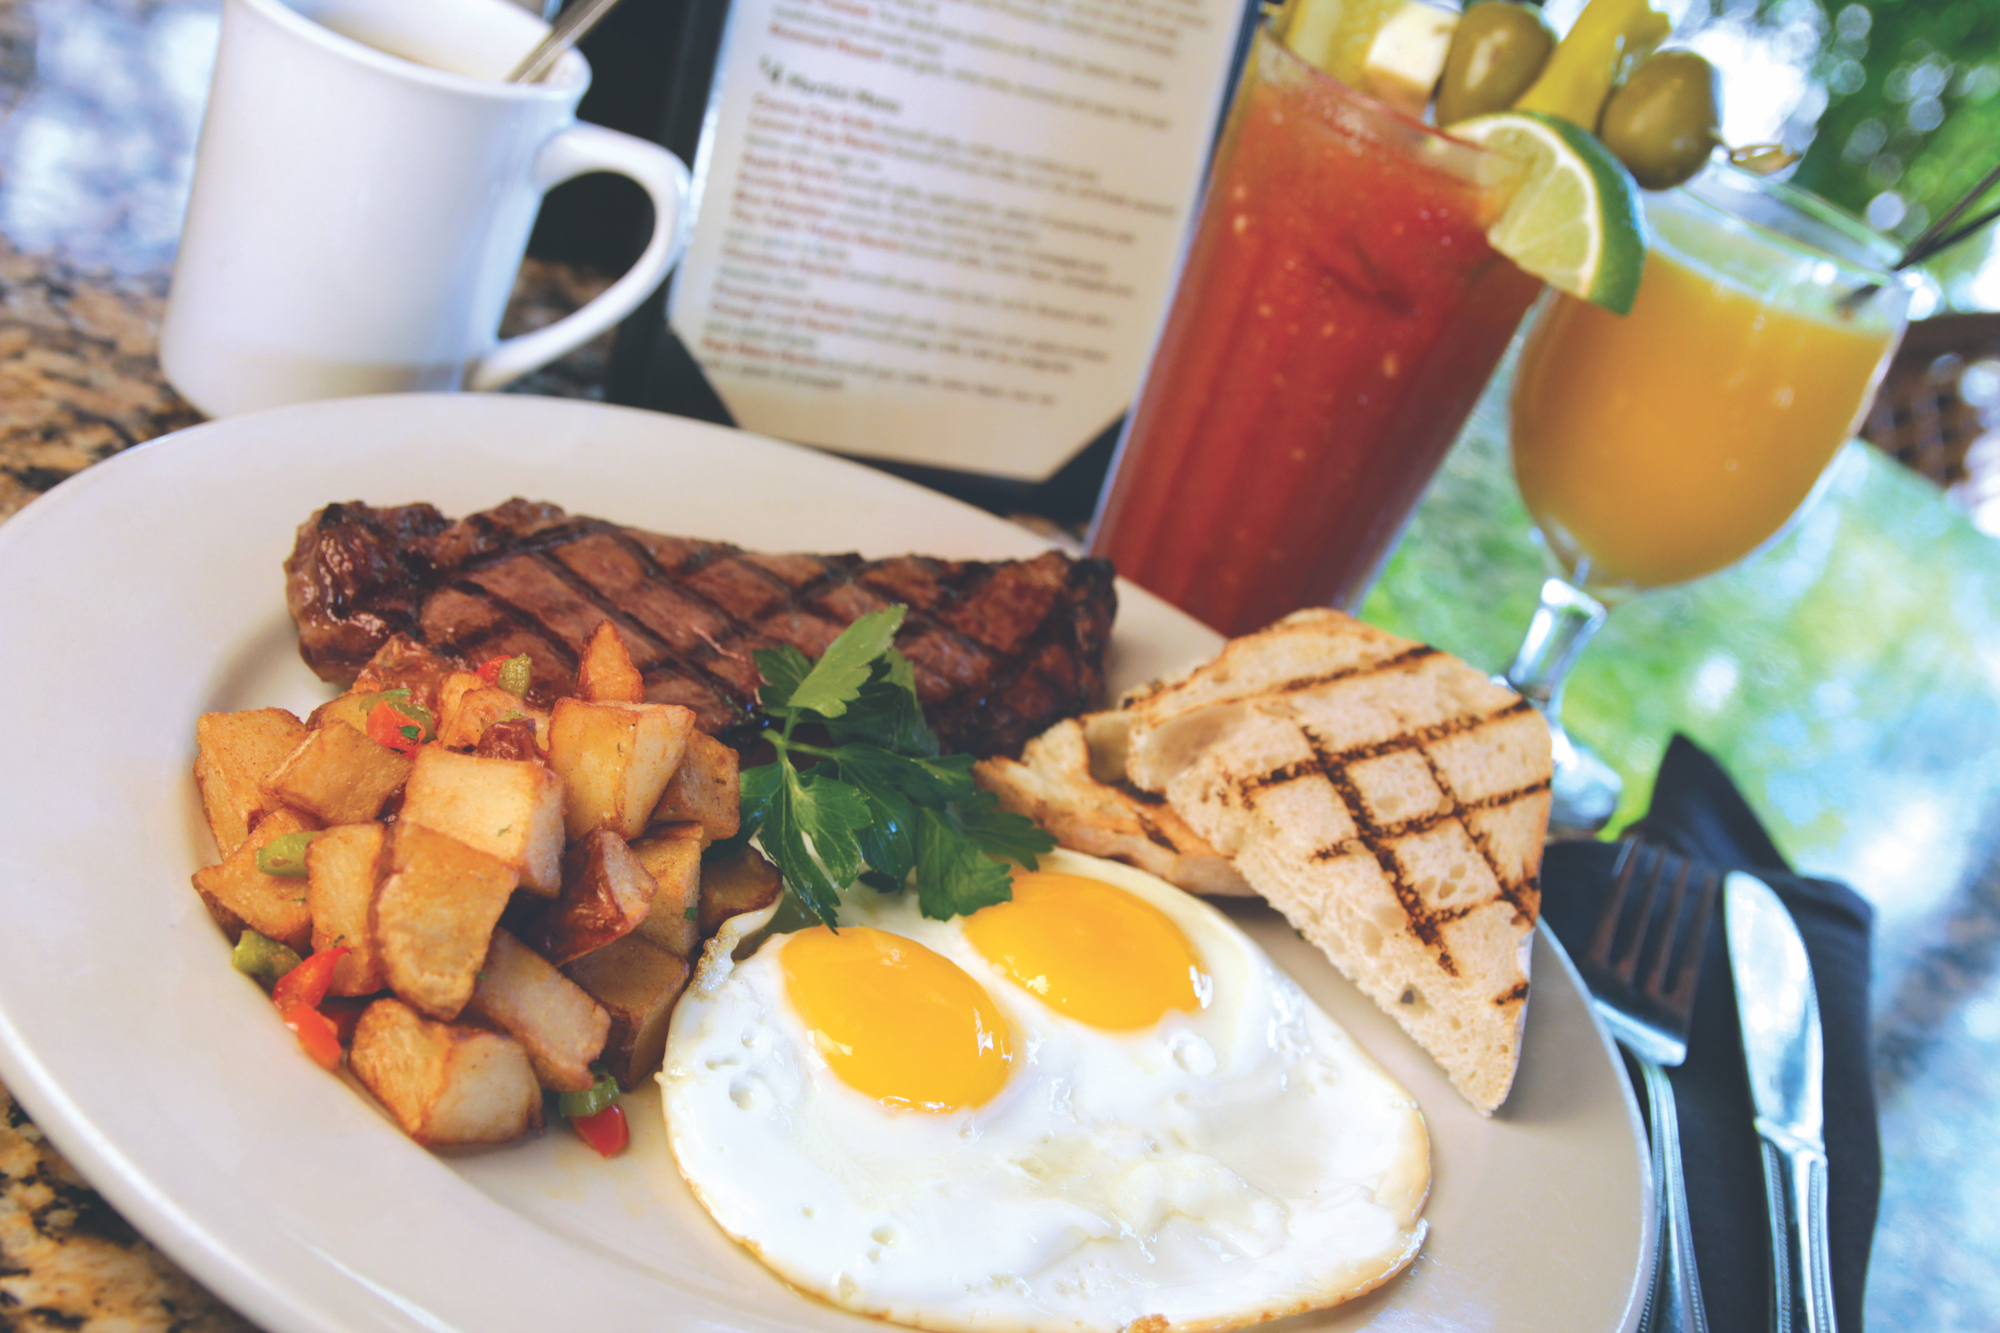 The Niman Ranch Steak and Eggs at Mattison's Riverwalk Grille are the perfect accompaniment for the Build Your Own Bloody Mary menu.